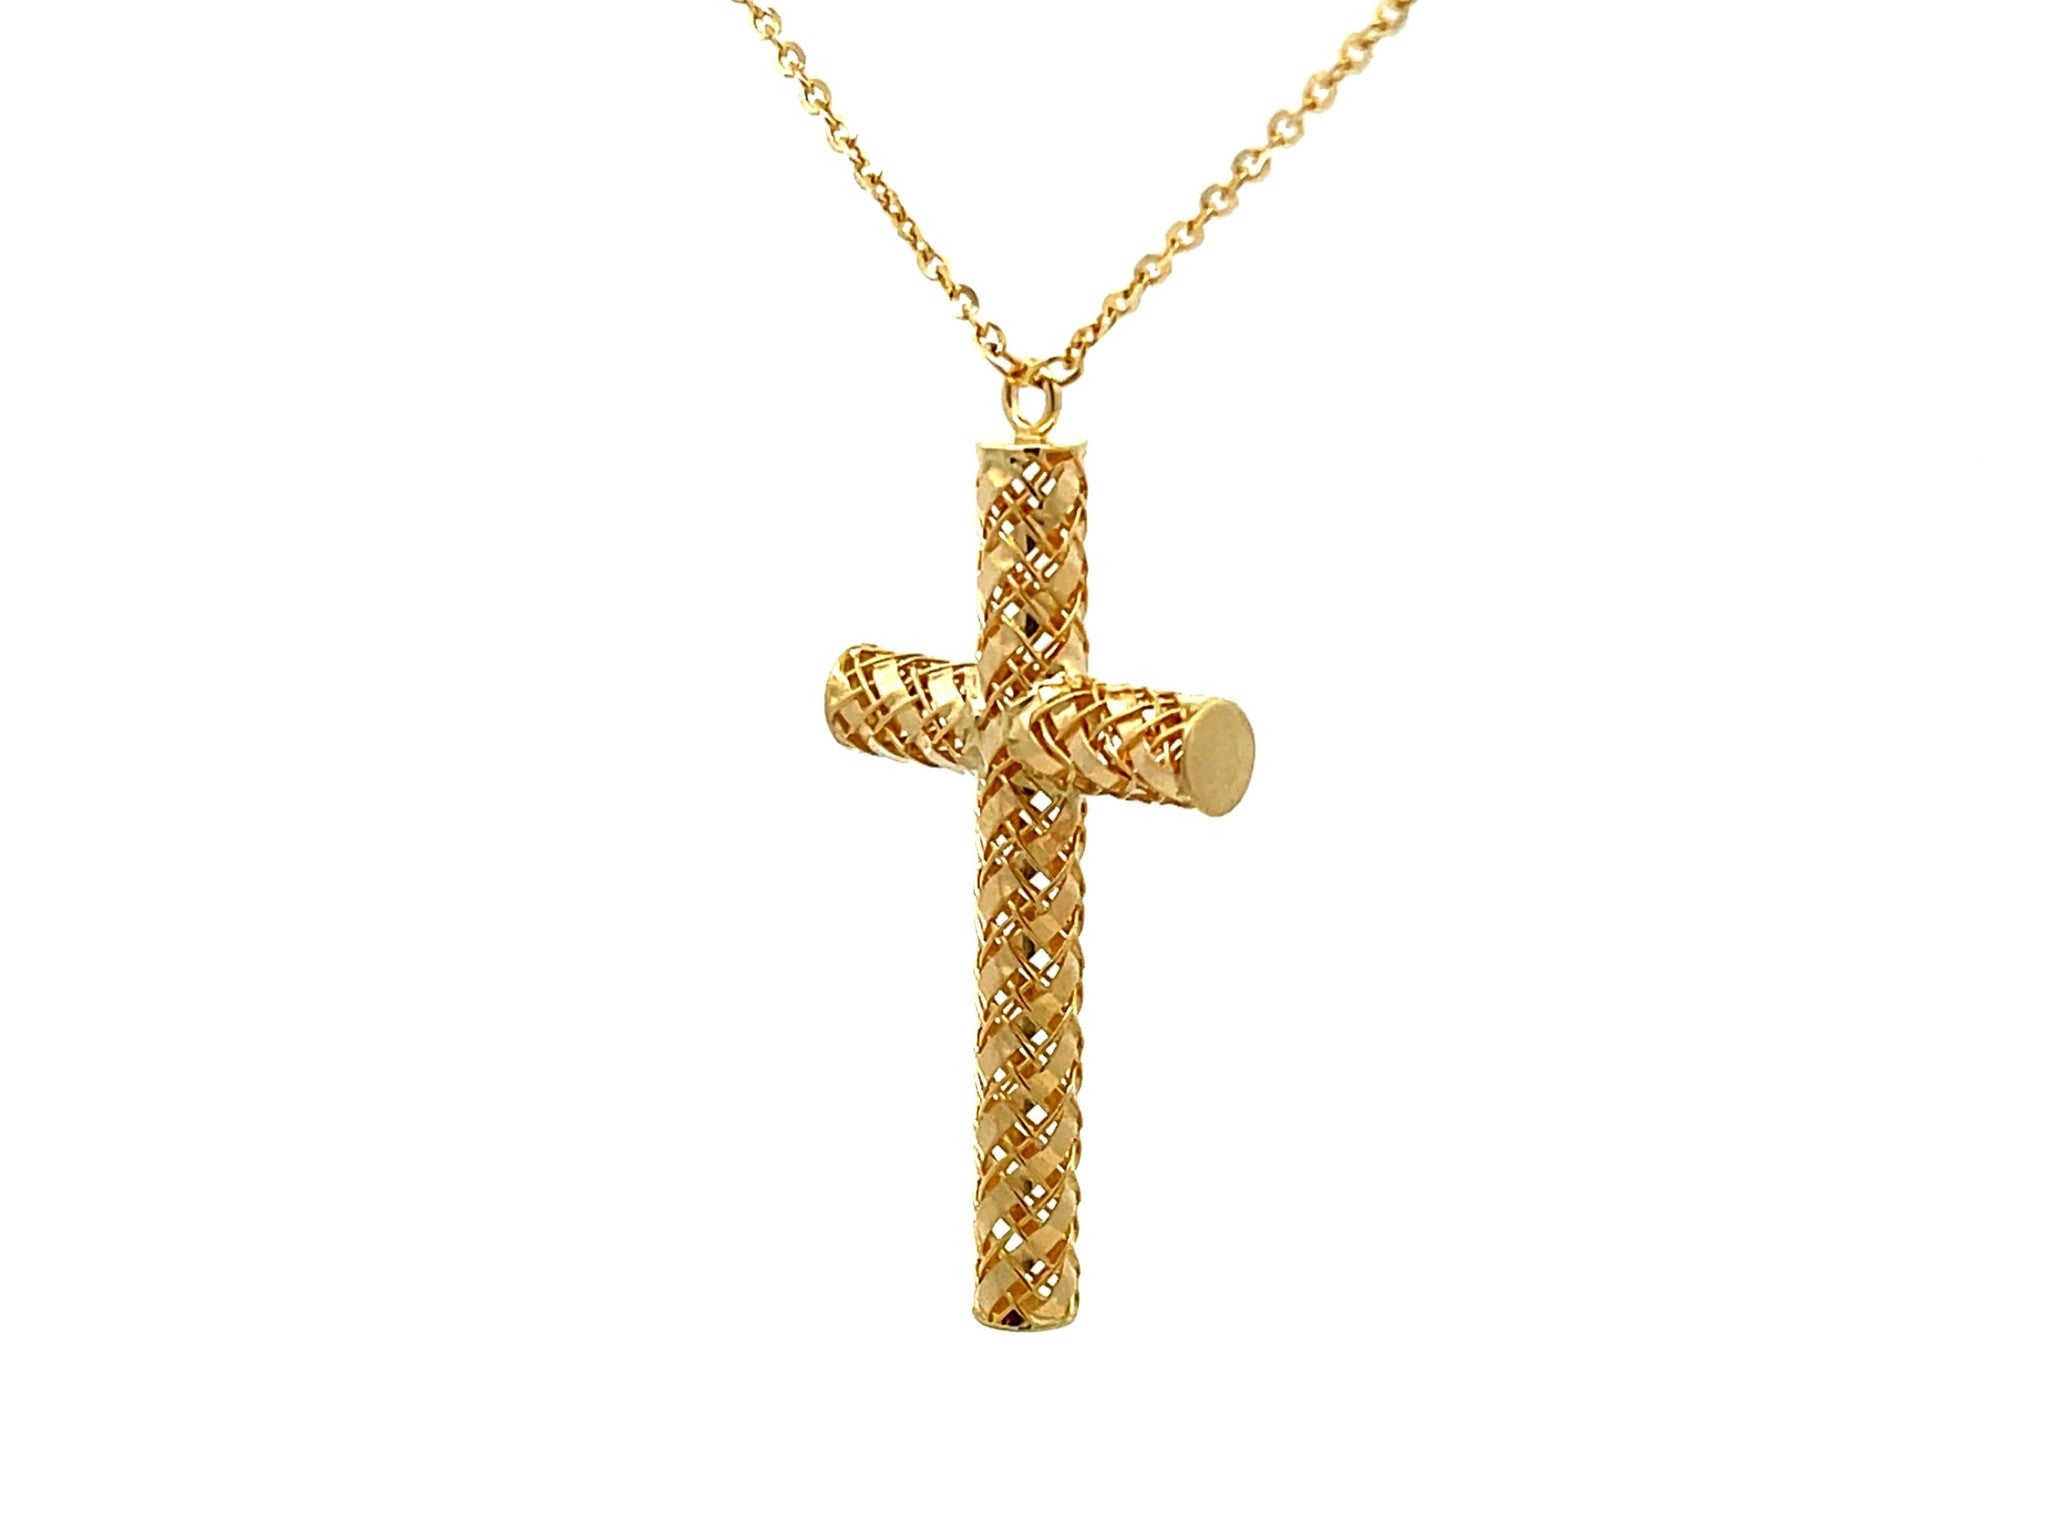 Textured Gold Cross Necklace in 14k Yellow Gold